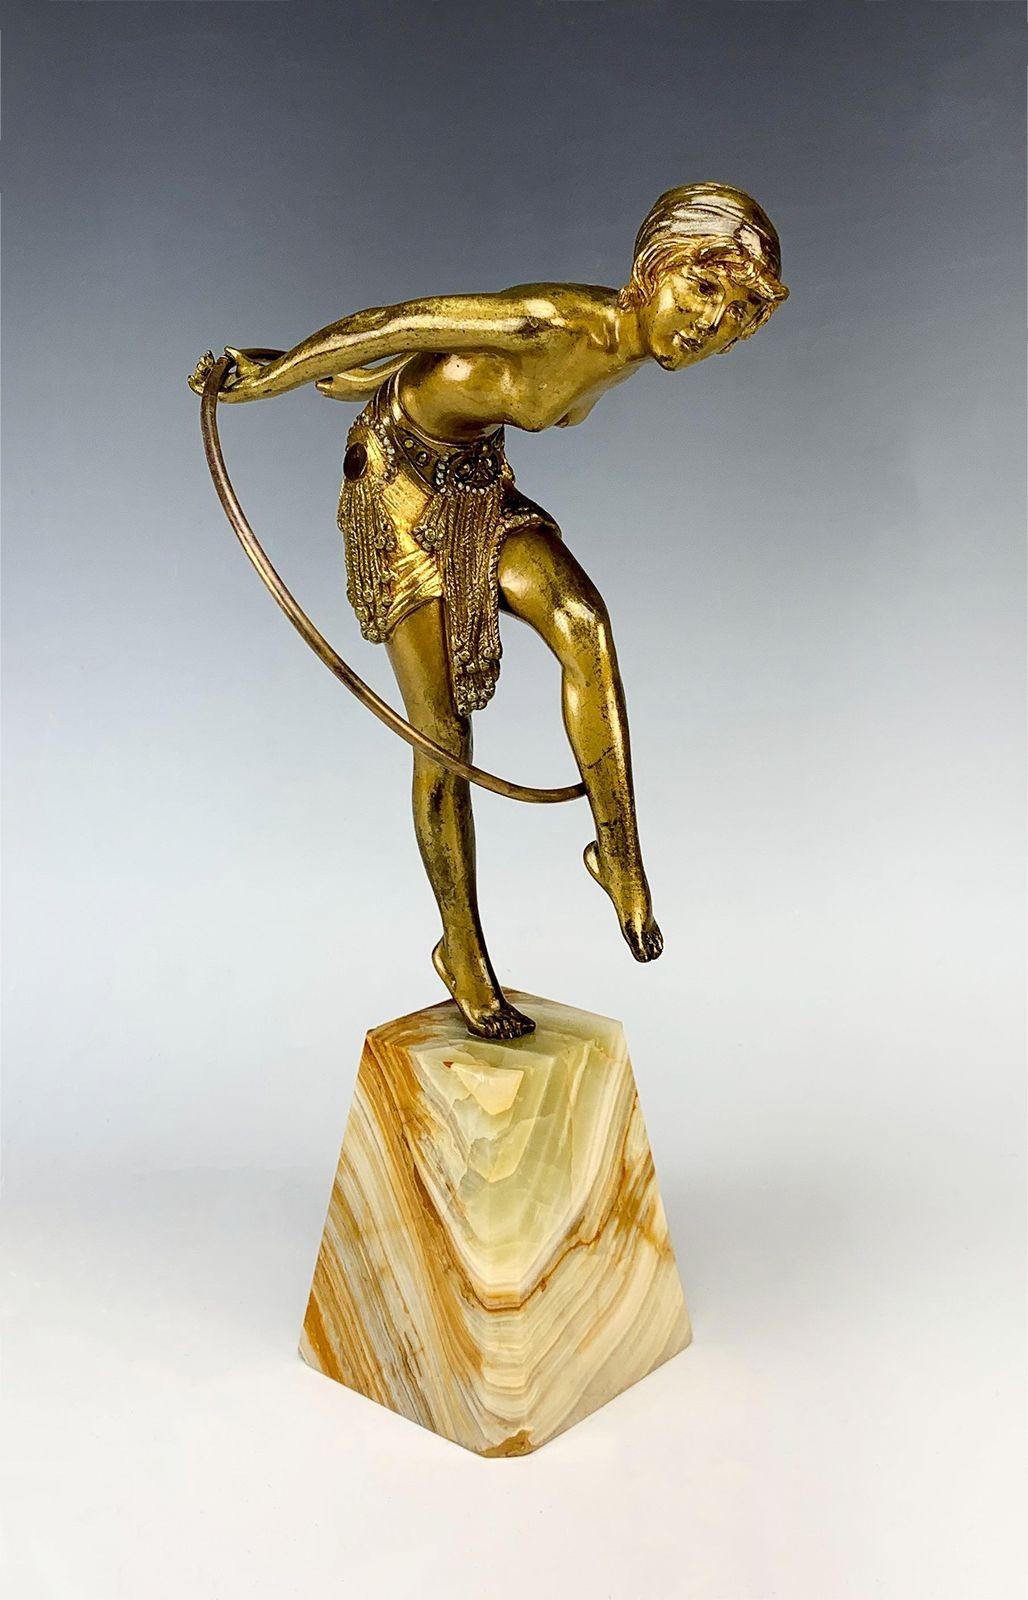 Hoop Dancer Gilt Bronze Sculpture on Onyx Base by D.H. Chiparus, c. 1920 In Good Condition For Sale In Los Angeles, CA